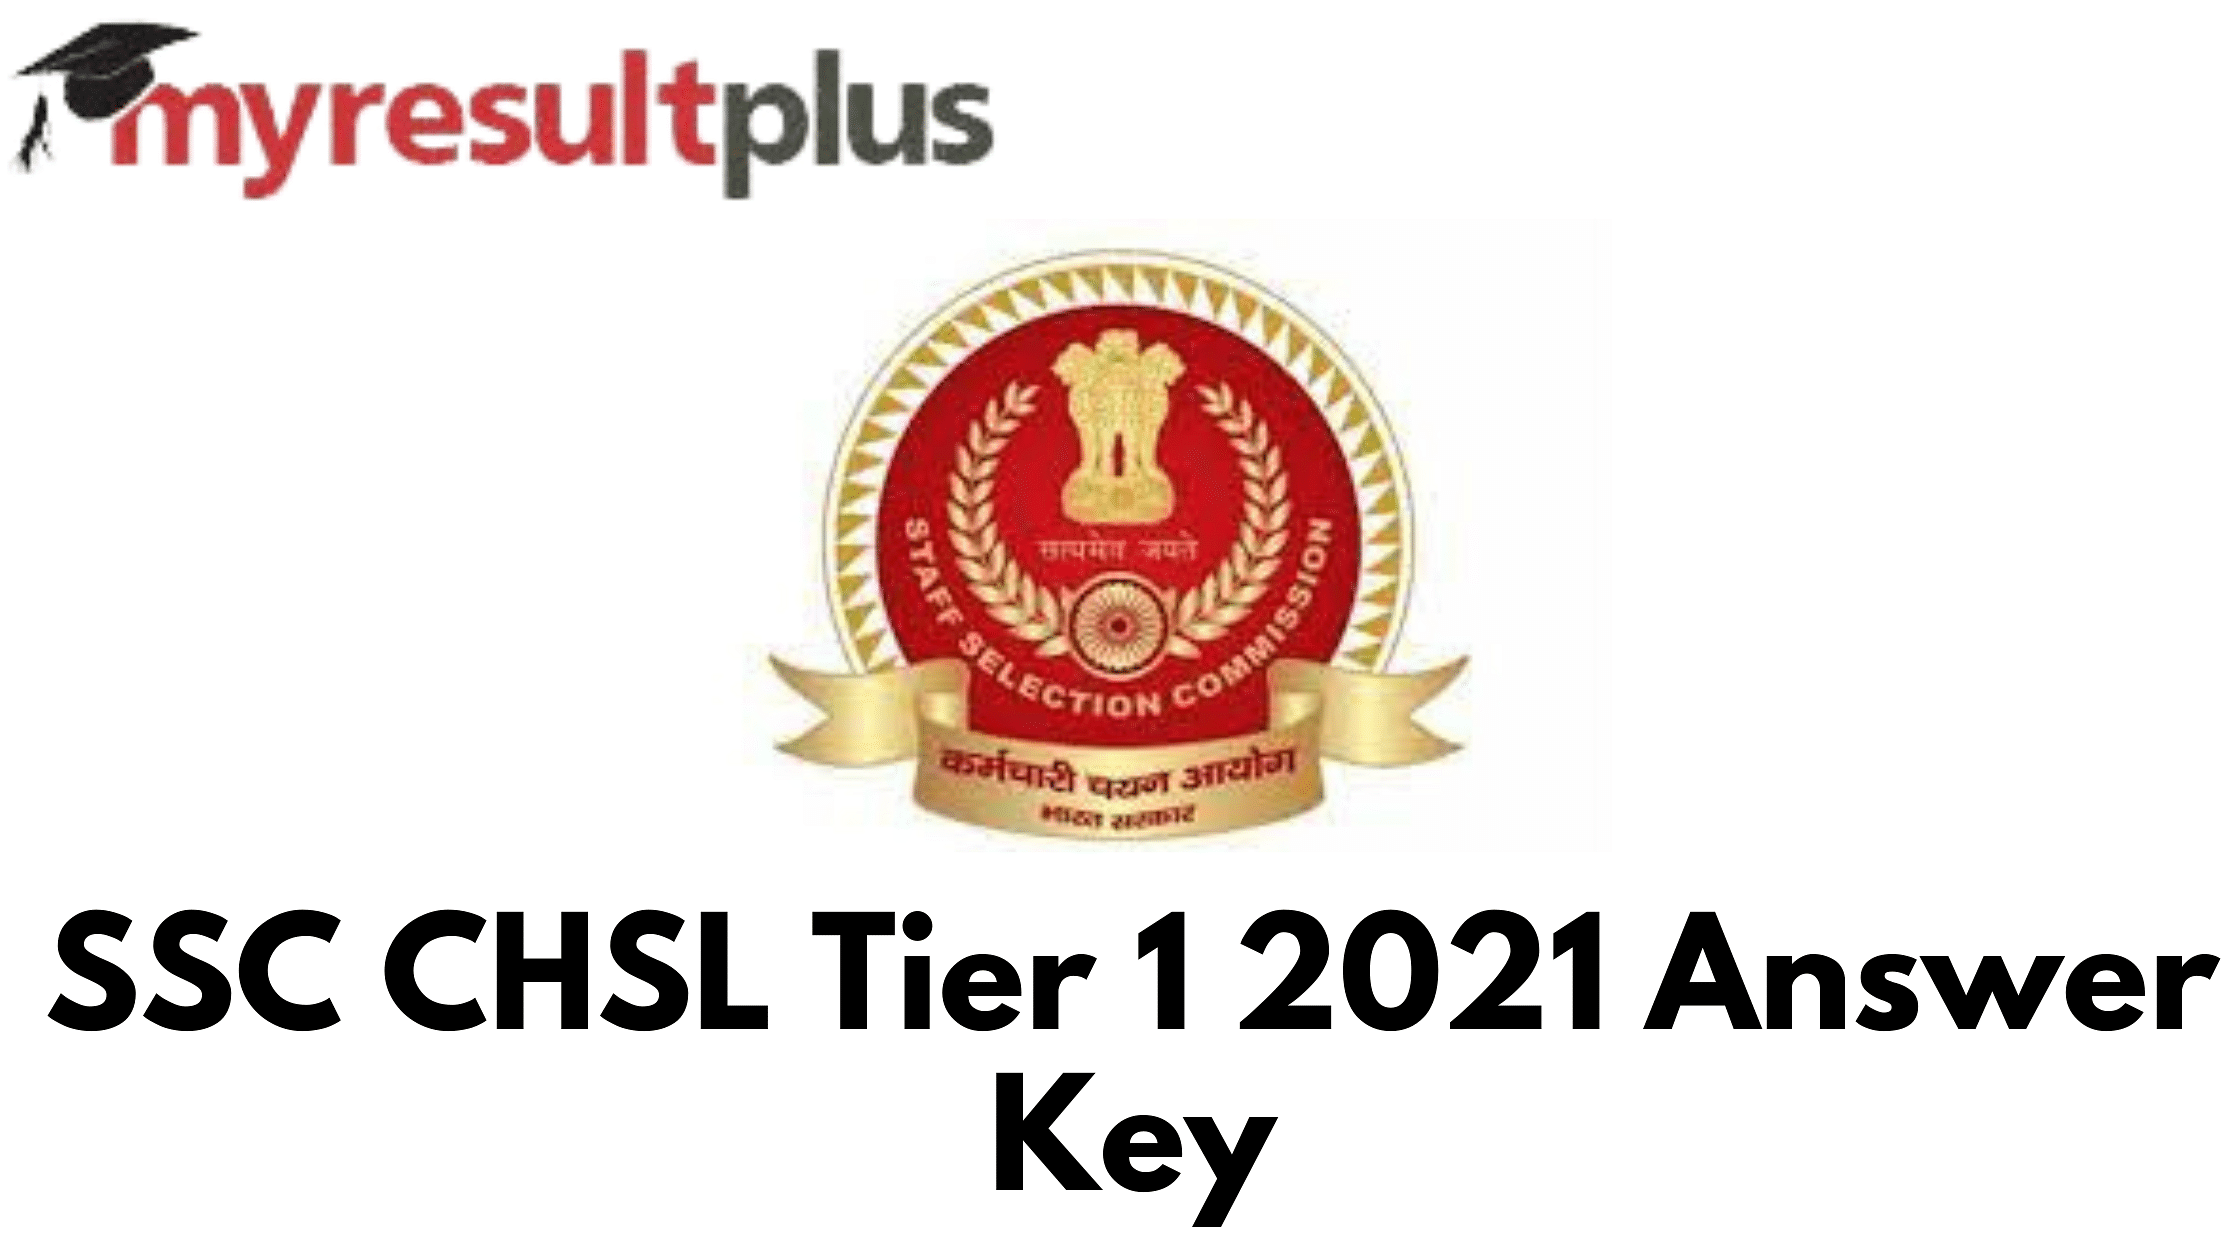 SSC CHSL 2021 Final Answer Key For Tier 1 Released, Here's Direct Link to Check